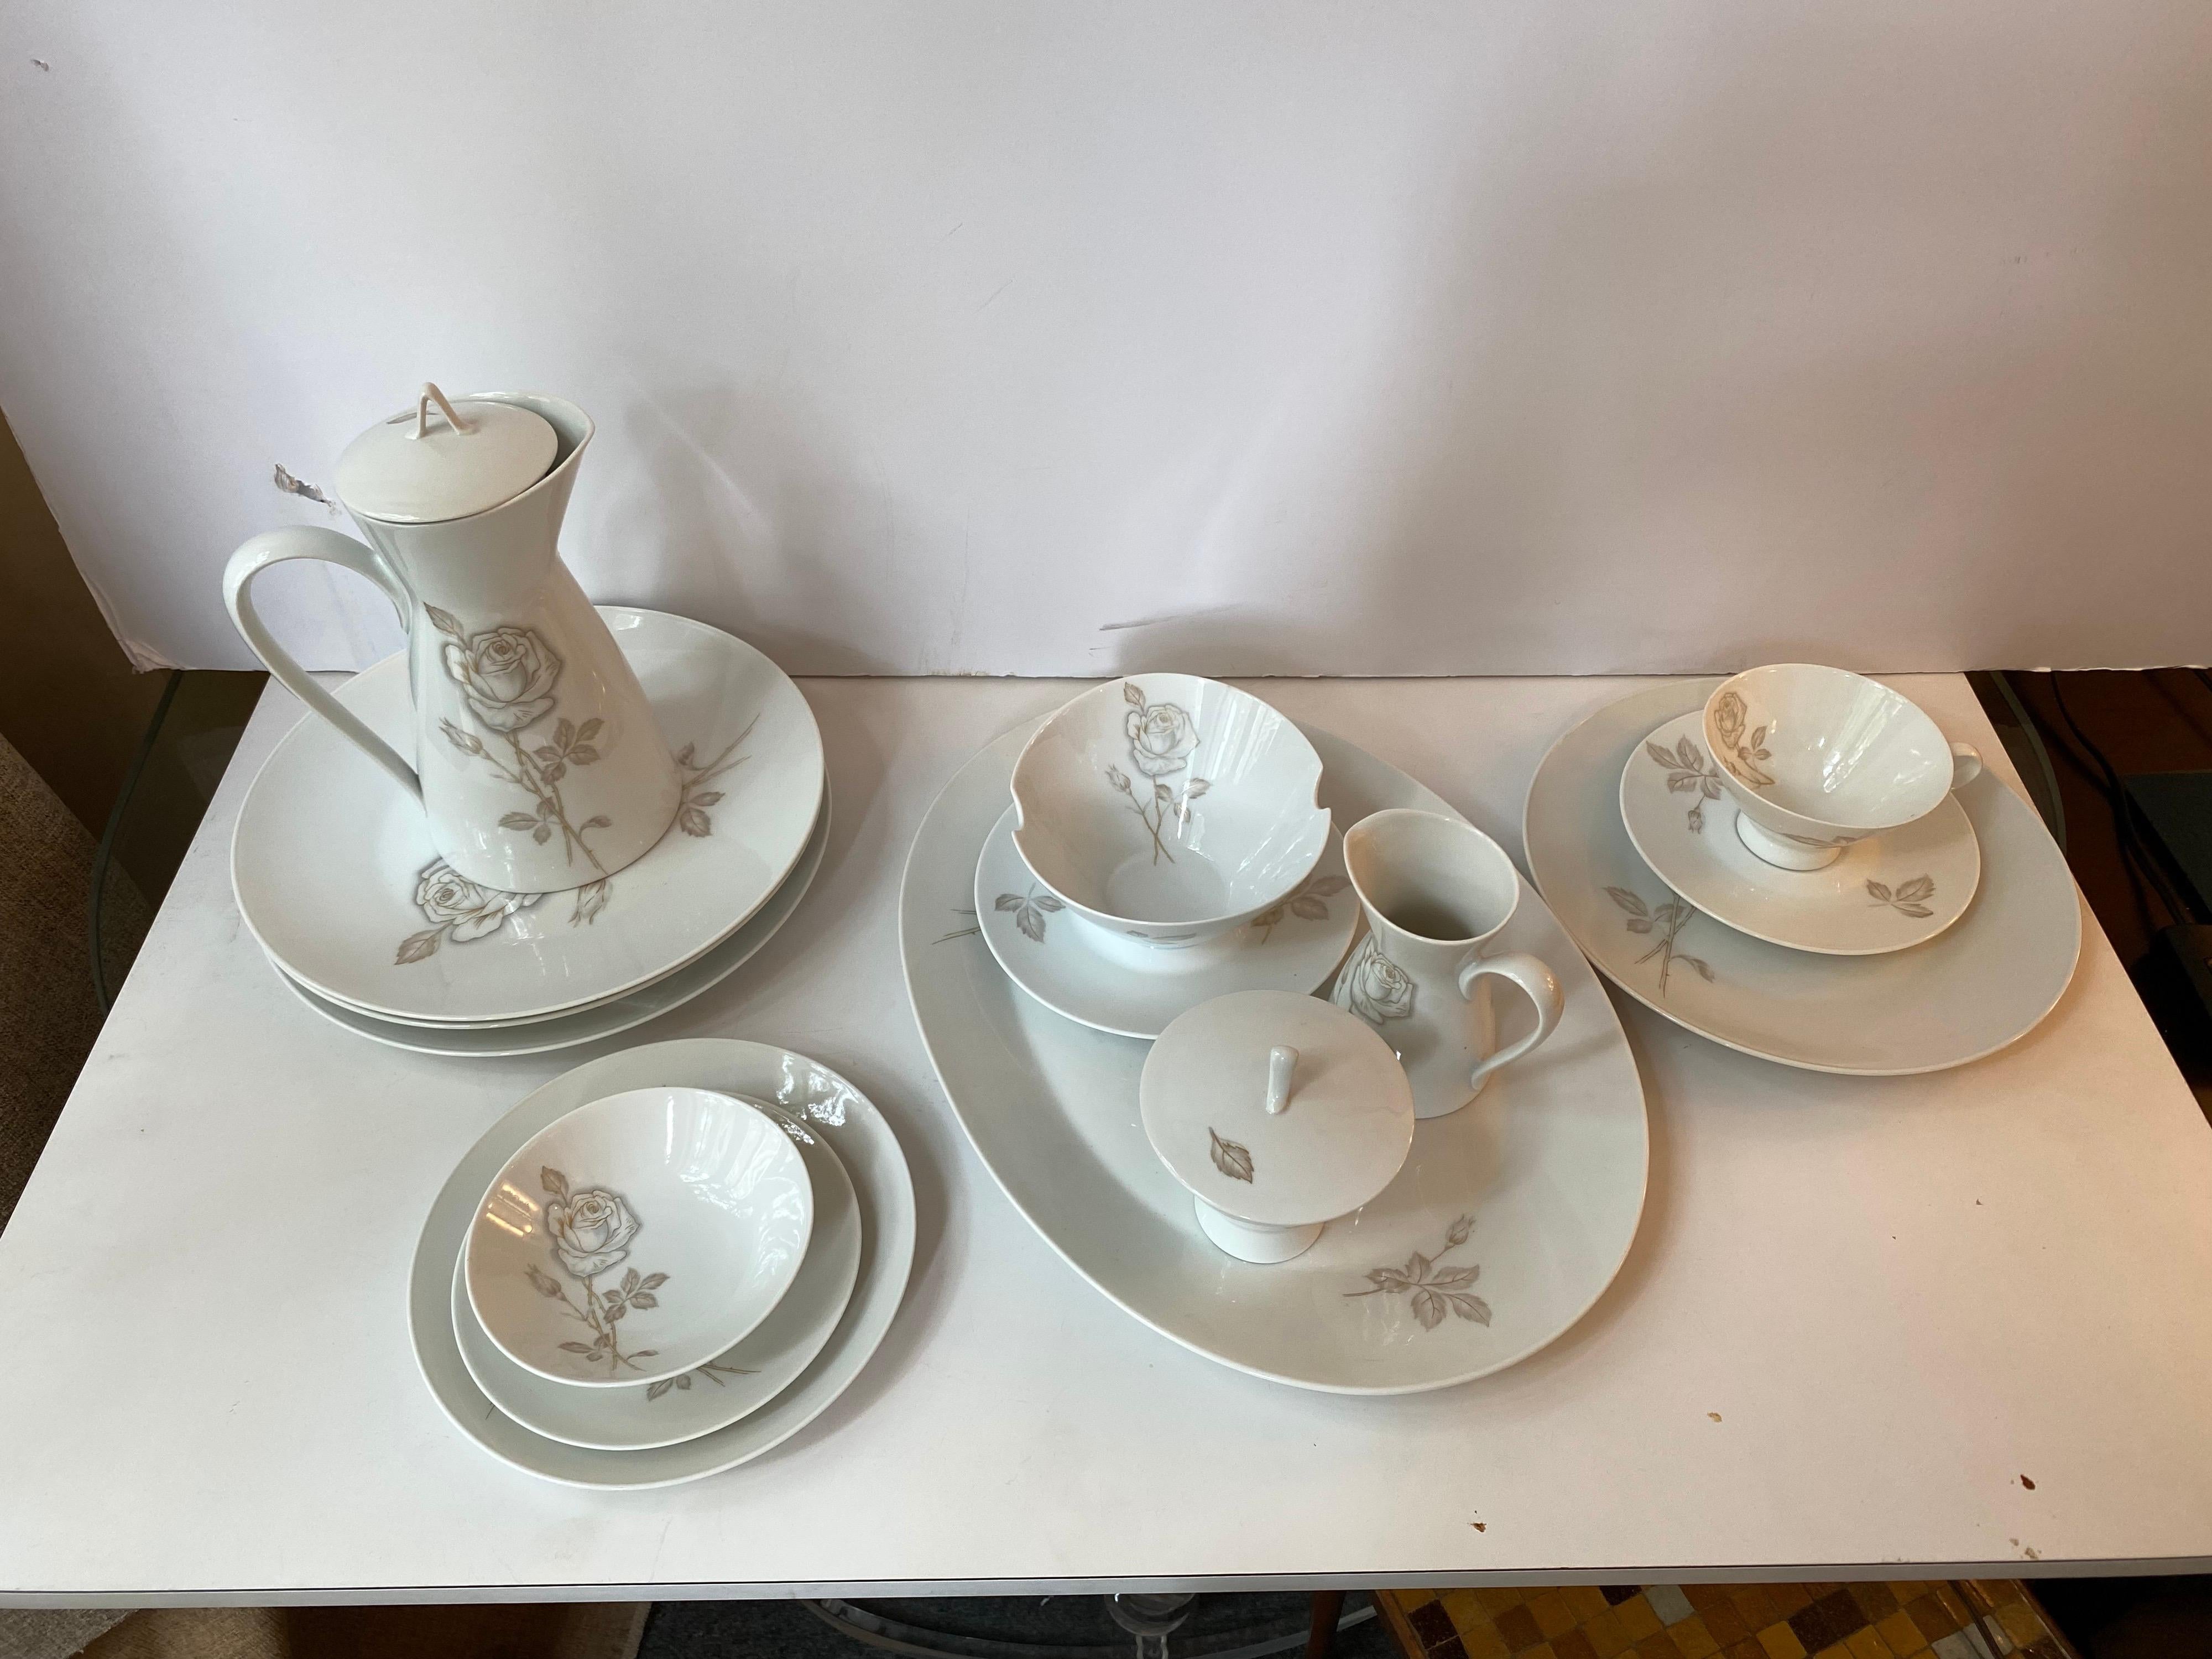 Raymond Loewy Classic Rose by Rosenthal, Germany. Really nice large set ready to use! Set really looks unused!
Set consists of
12 dinner plates 9.75 across
14 salad plates 7.5 across
14 bread plates 6.0 across
12 small bowls 5.0 across
14 cups and